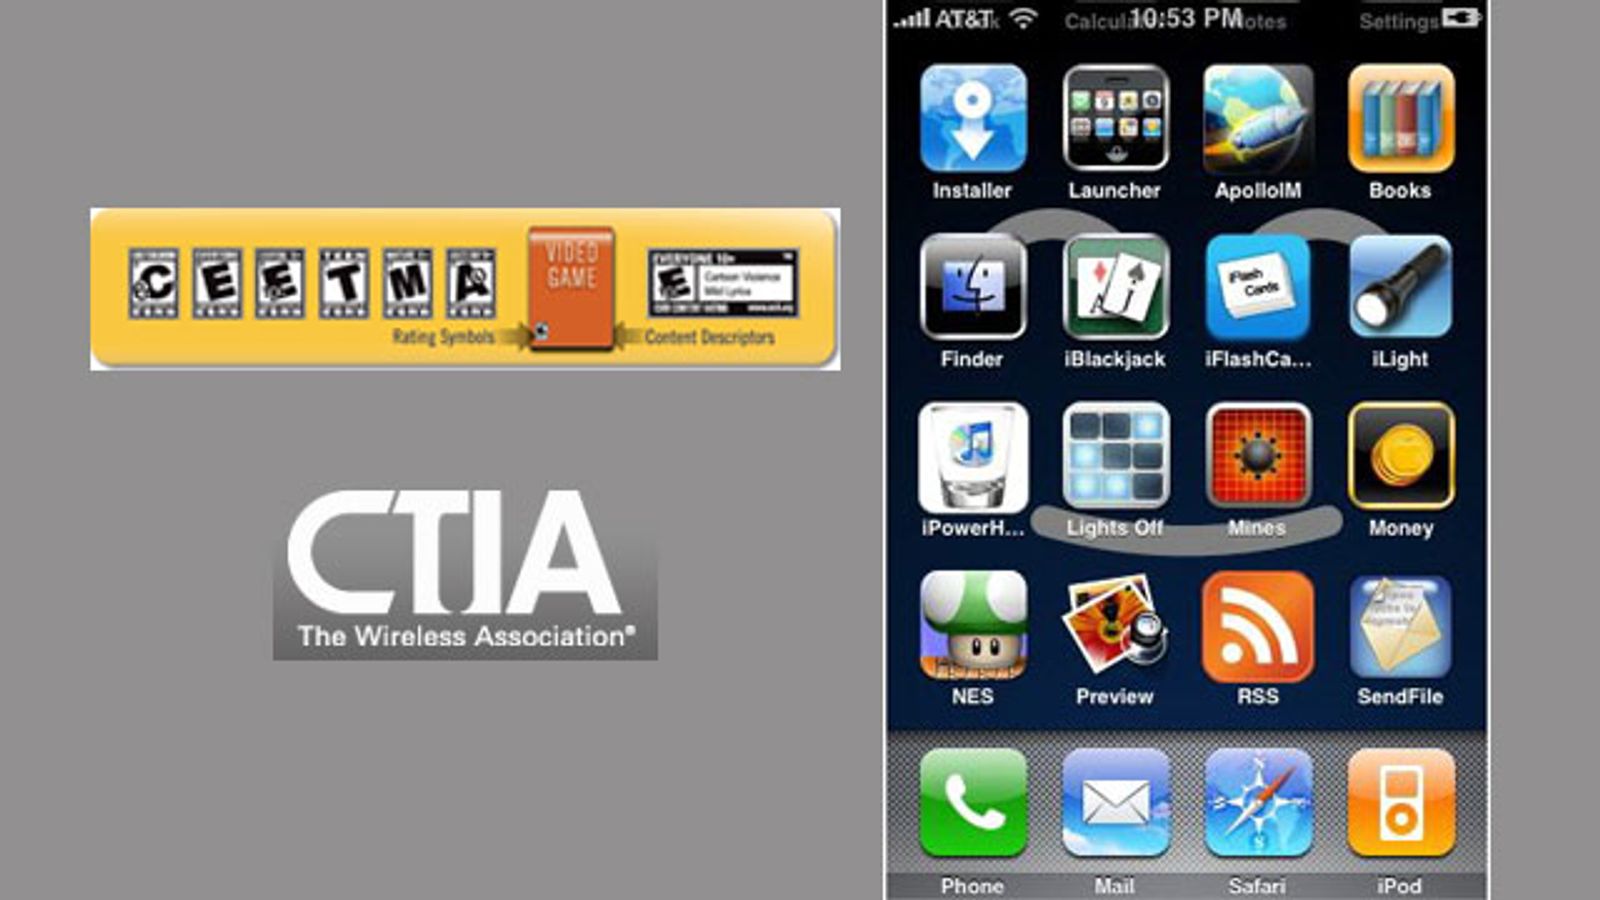 CTIA Announces Ratings for Mobile Apps